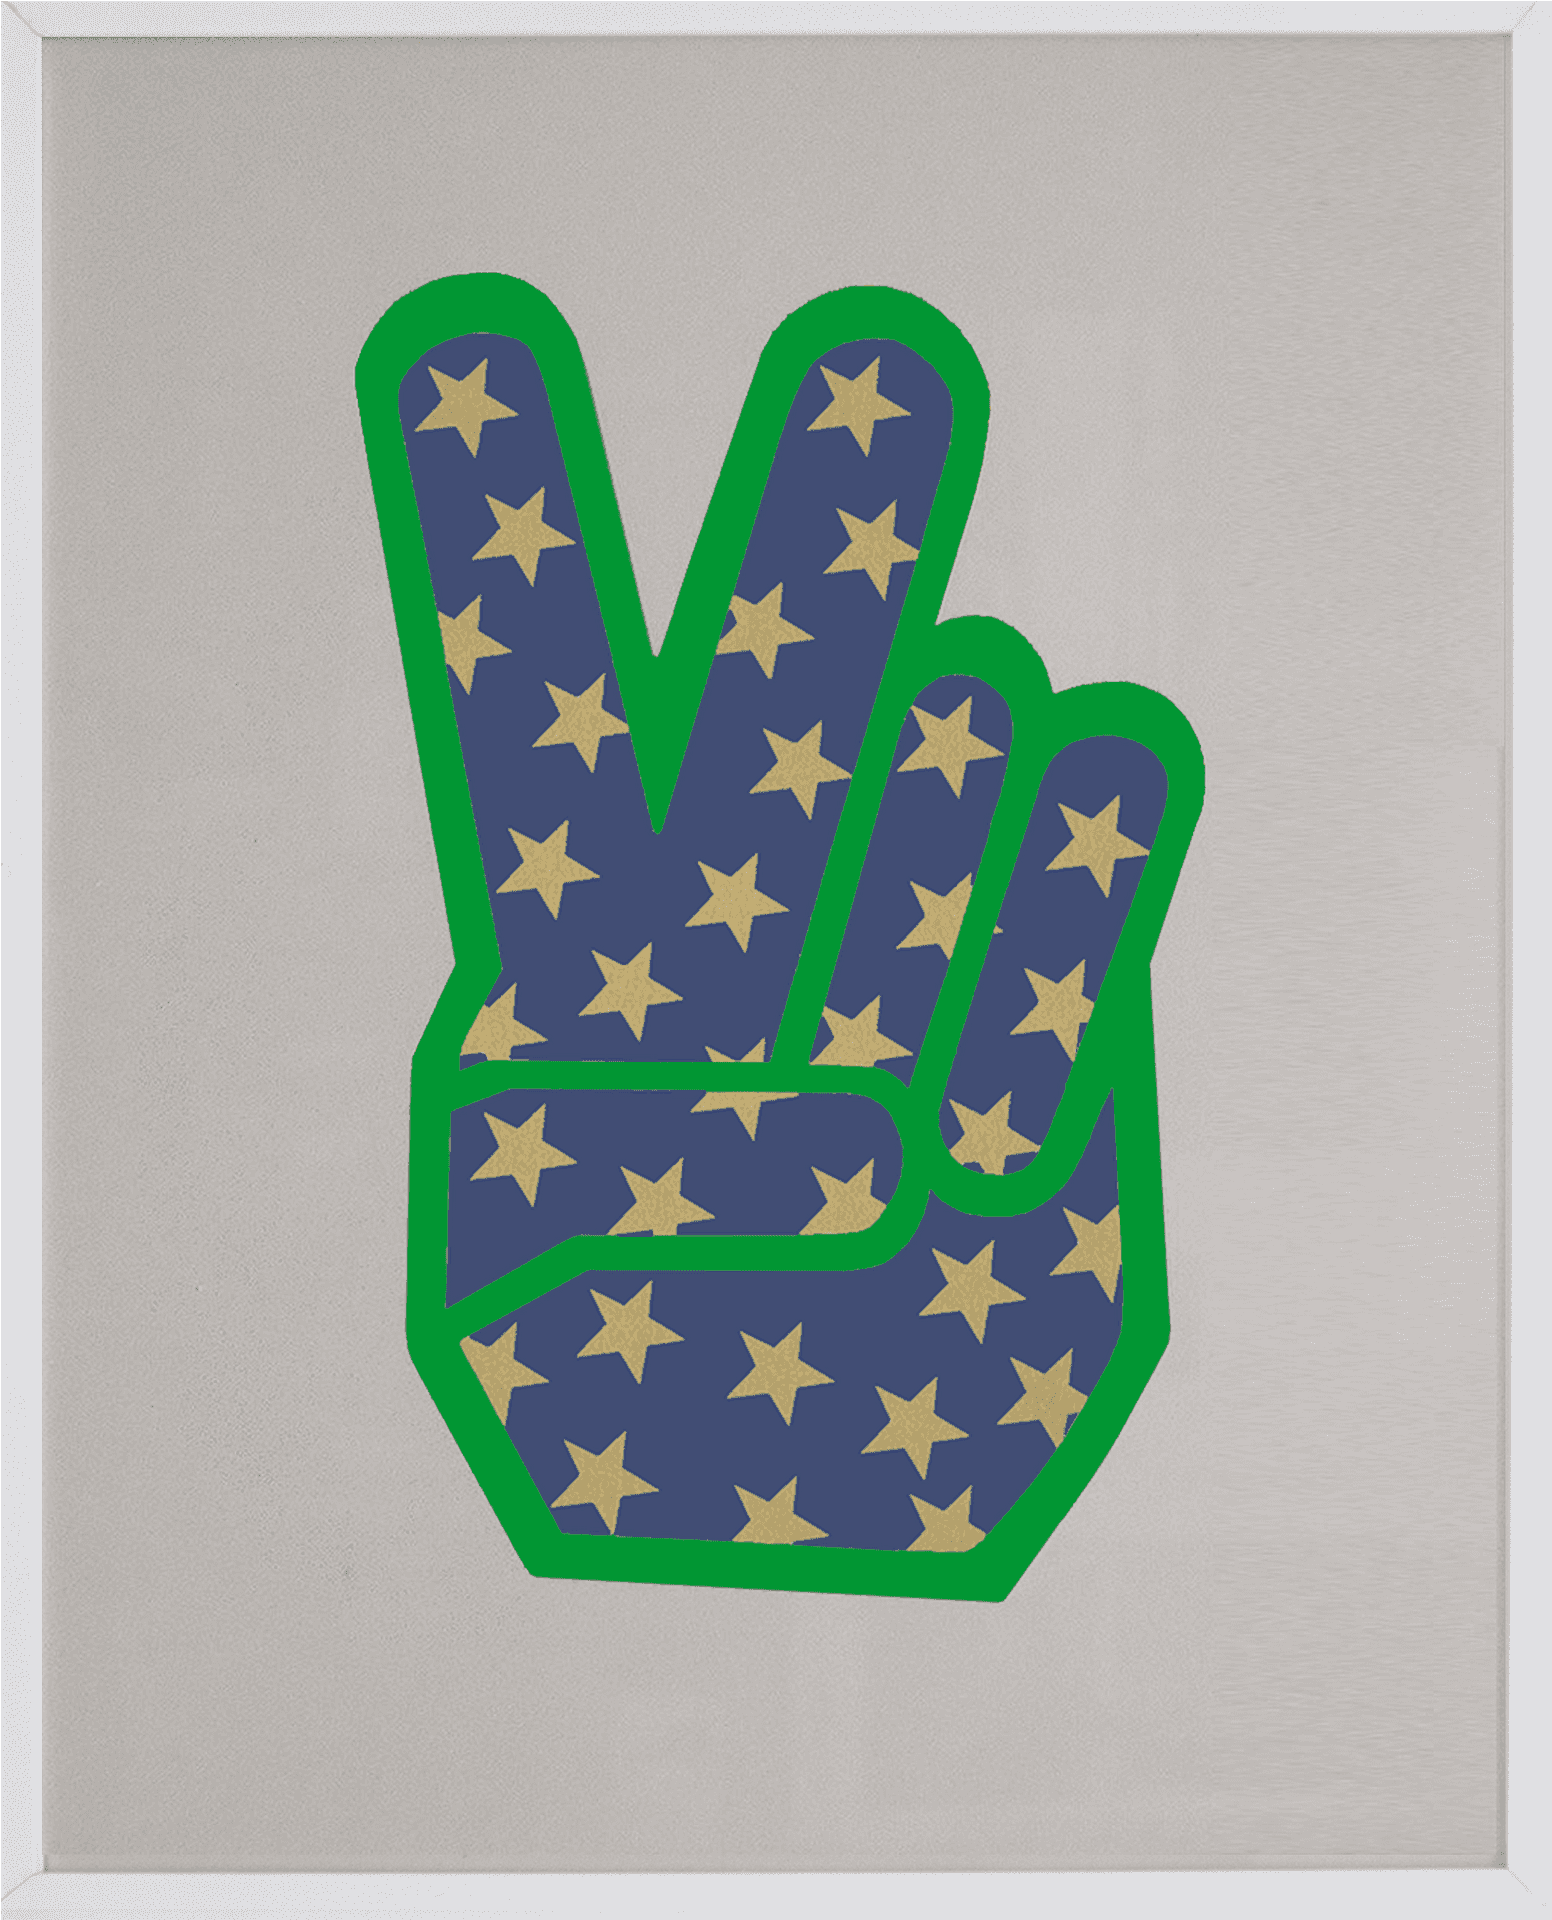 Star Patterned Peace Sign Hand Gesture PNG image